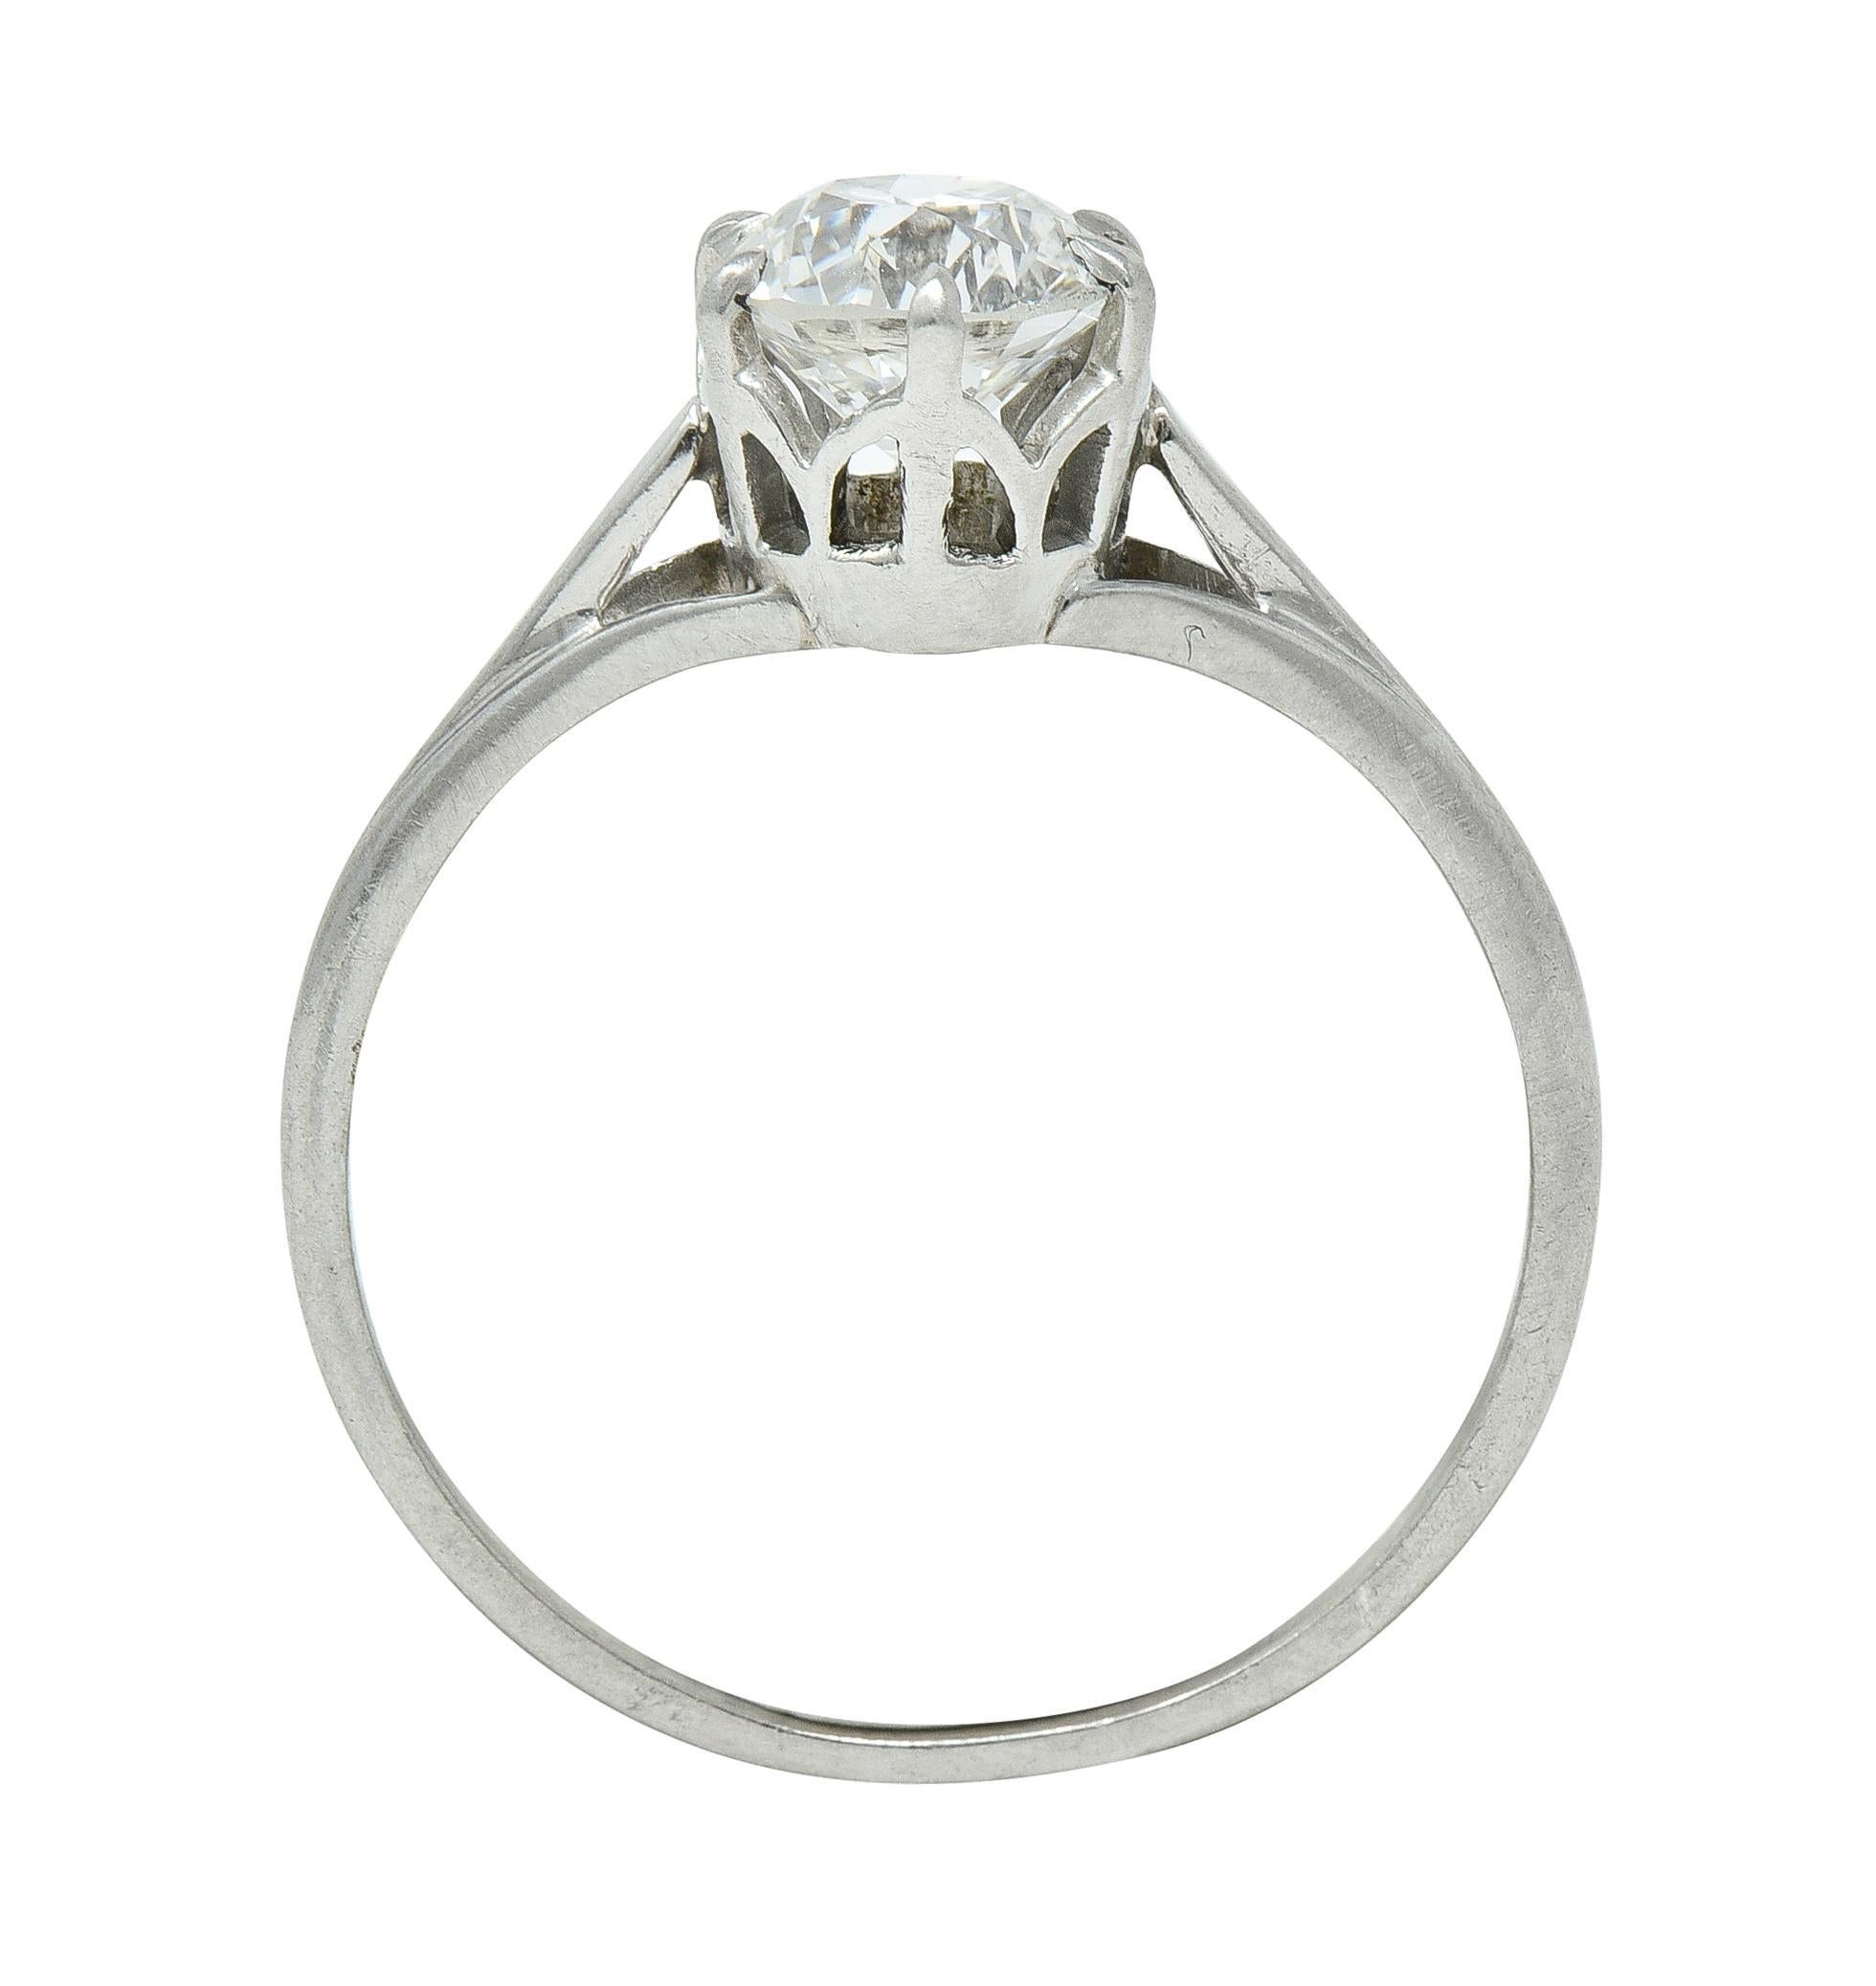 Early Art Deco 0.73 CTW Old European Cut Diamond Platinum Engagement Ring For Sale 4